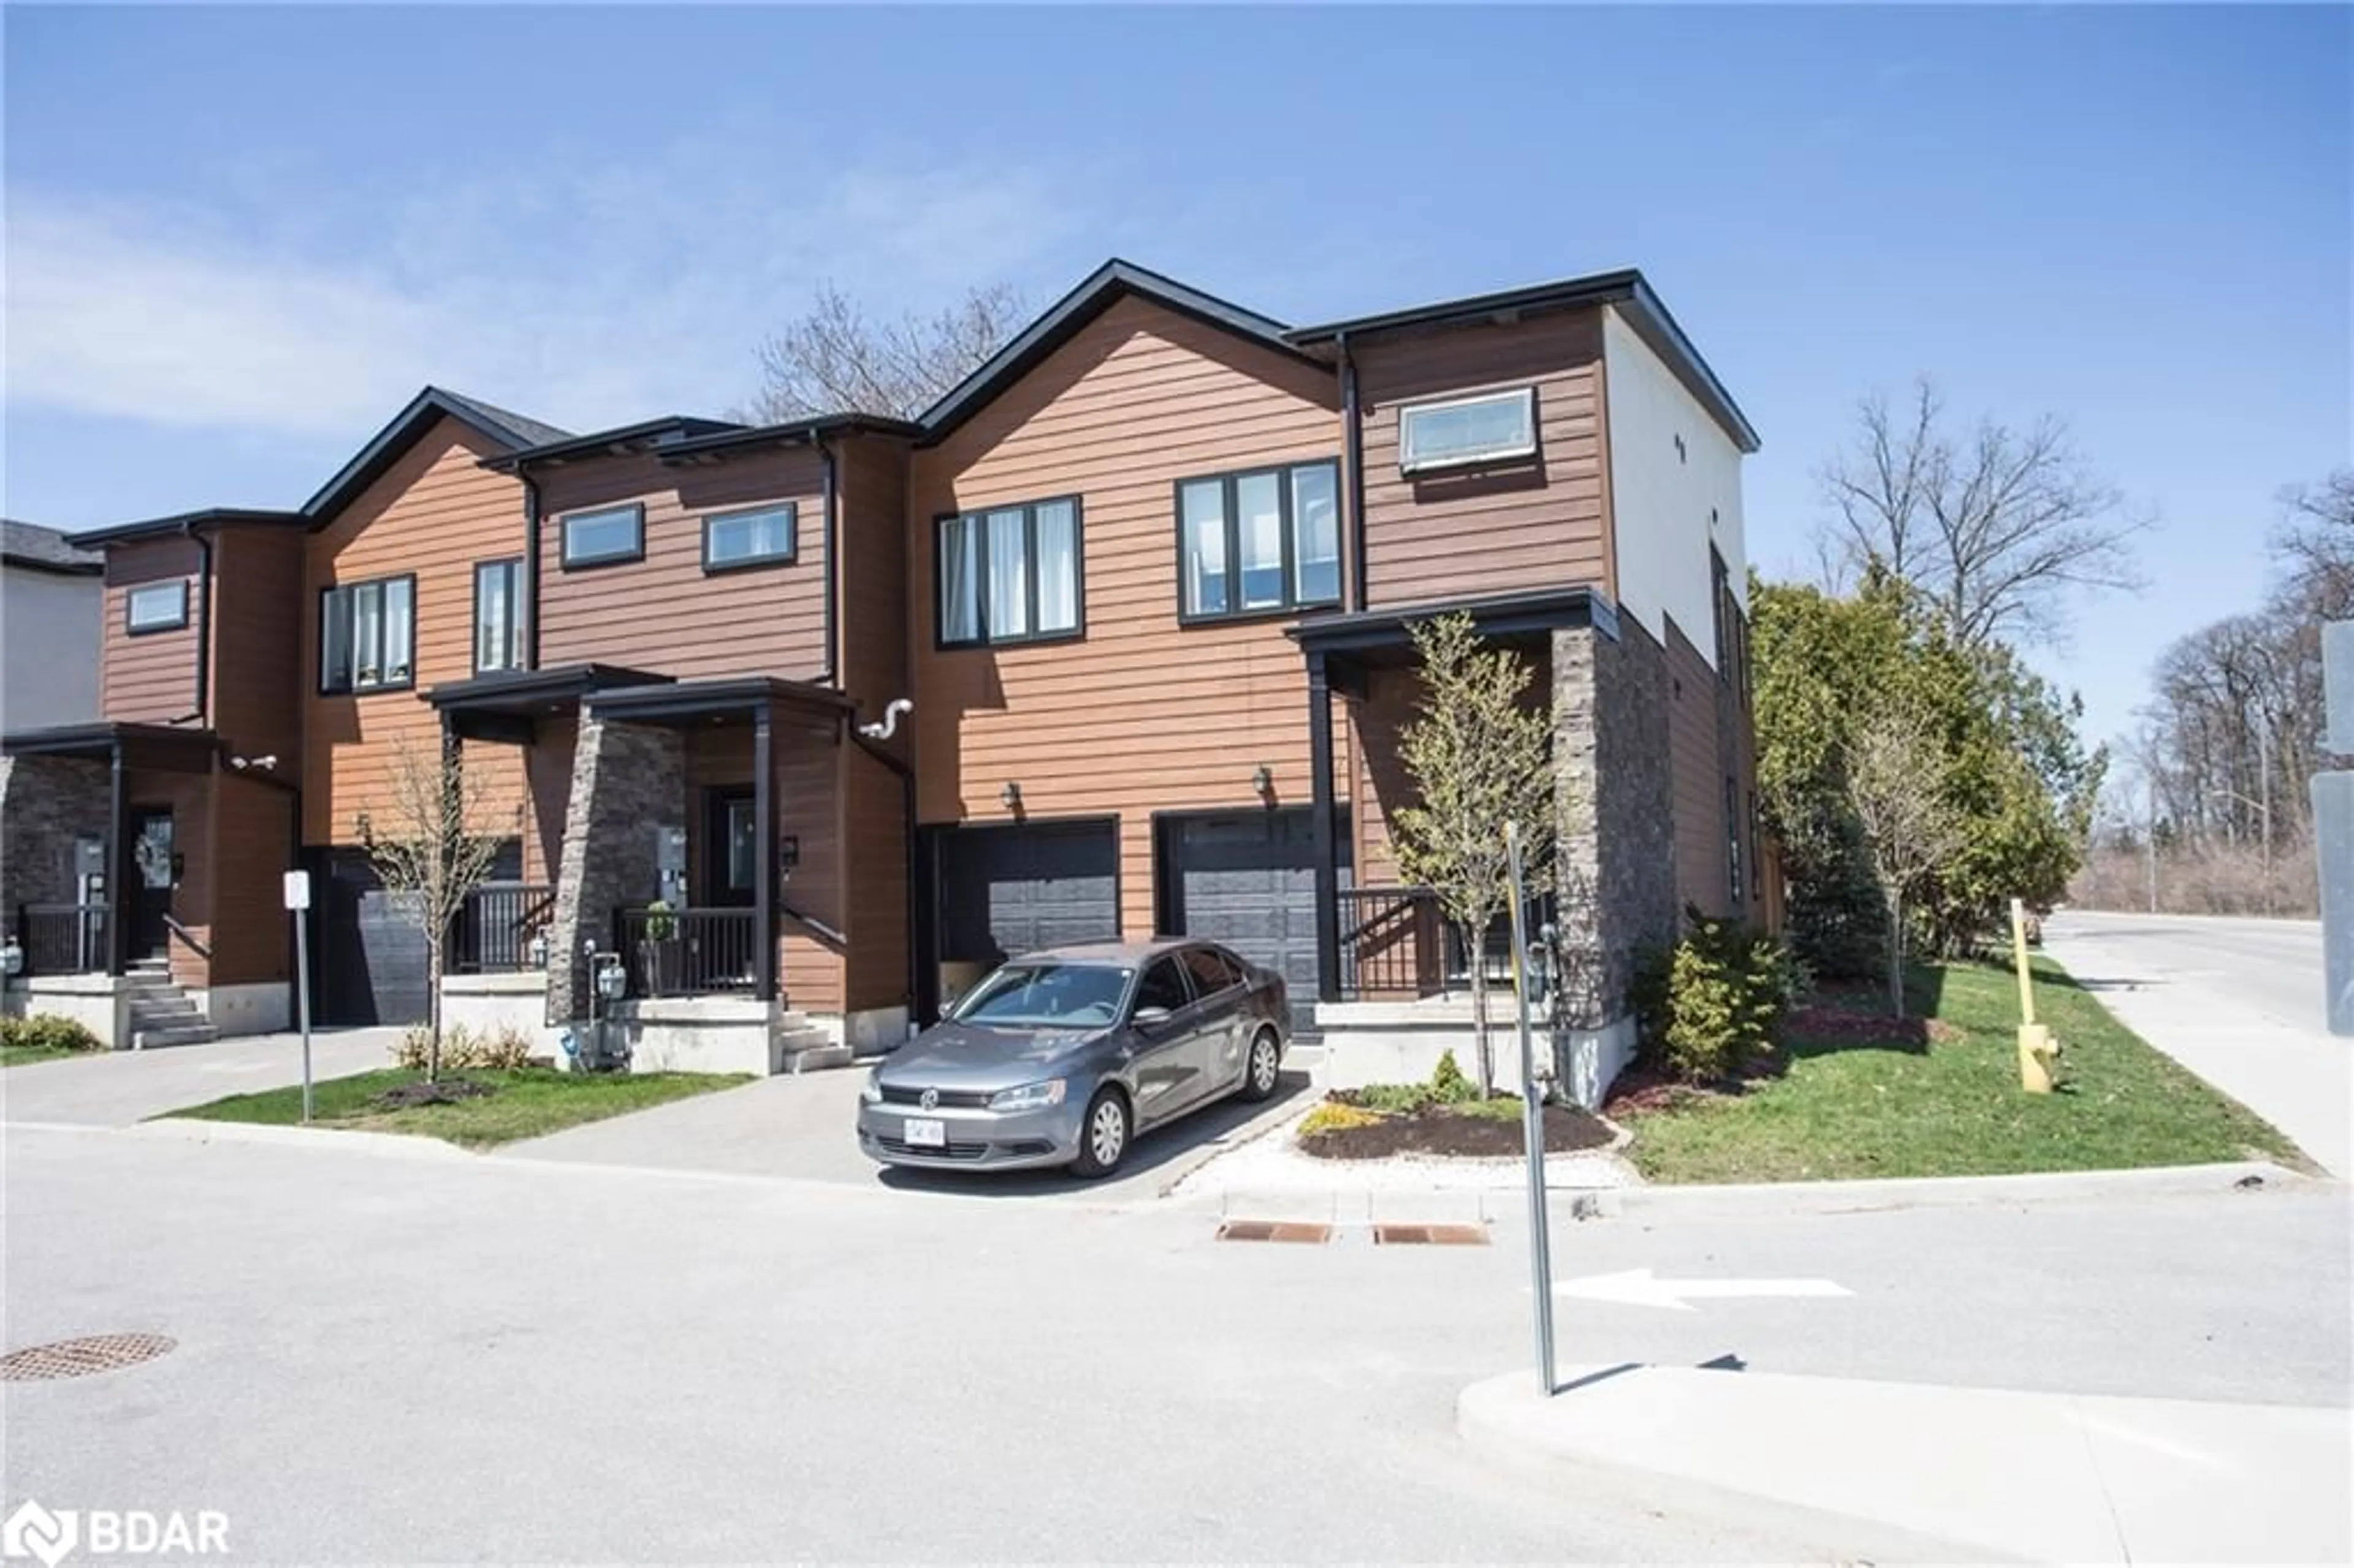 A pic from exterior of the house or condo for 28 Stonehart Lane Lane, Barrie Ontario L4M 7E8